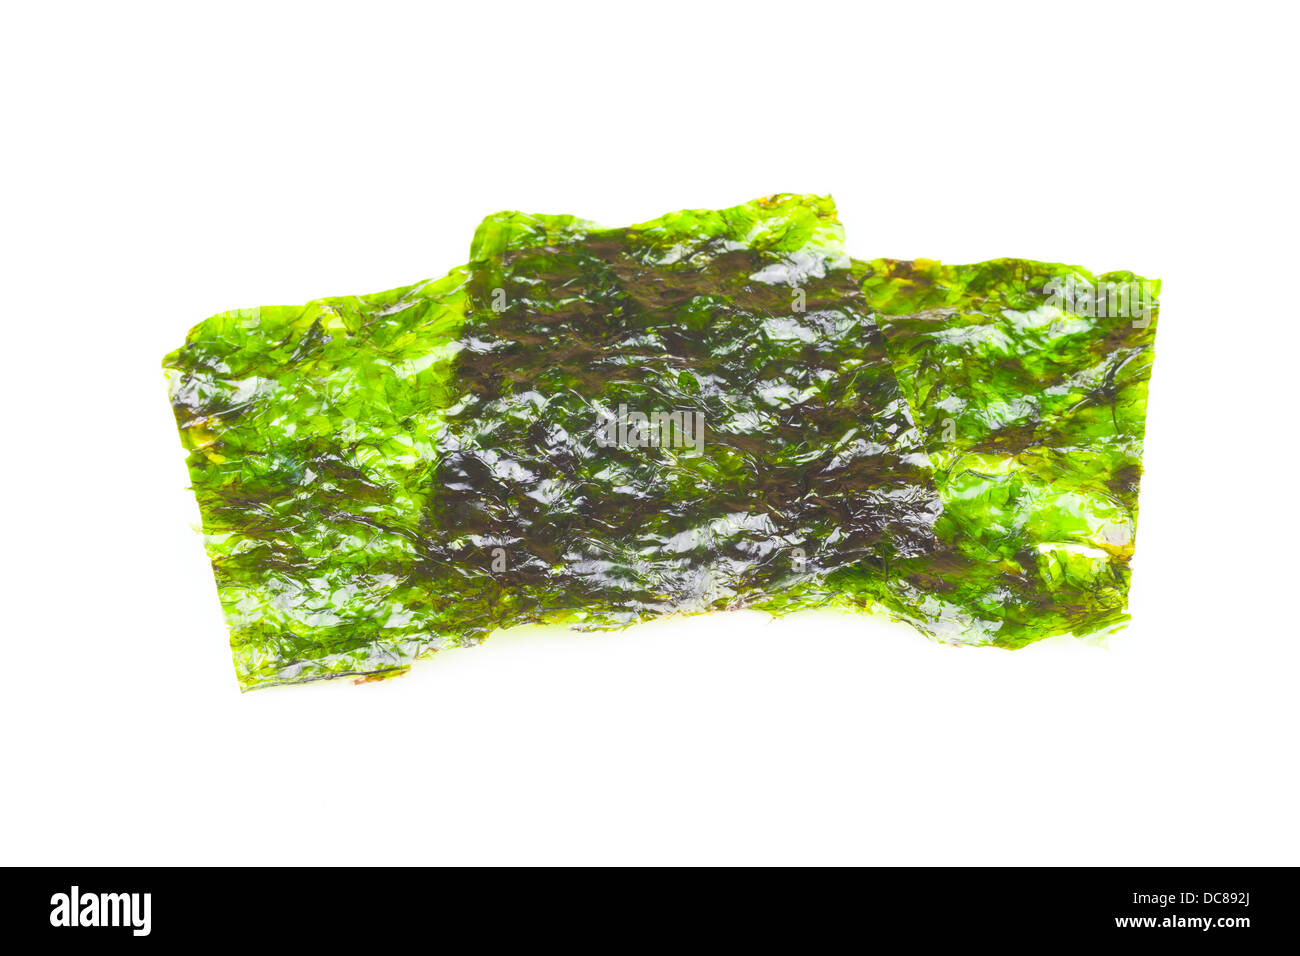 Ulva lactuca, seaweed or laver, on a white background Stock Photo